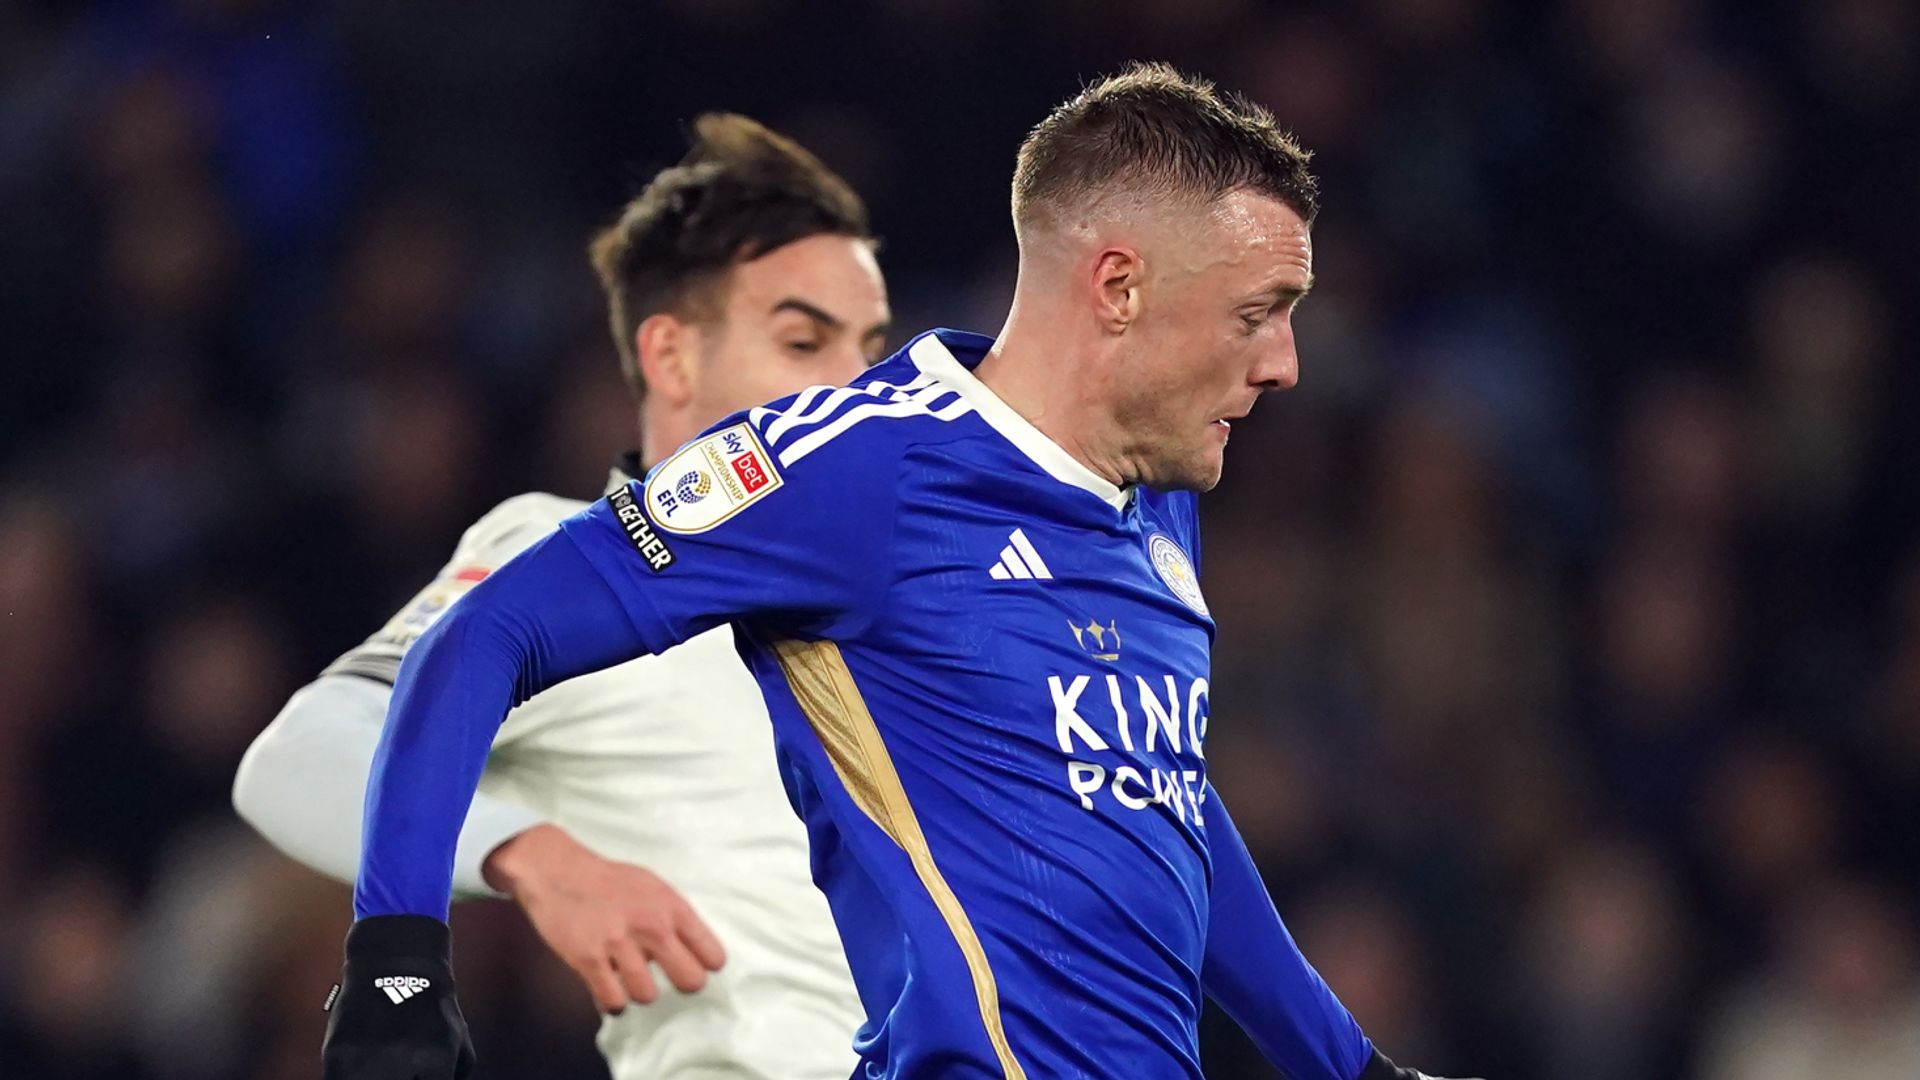 Vardy nets as Leicester cruise past Sheff Wed